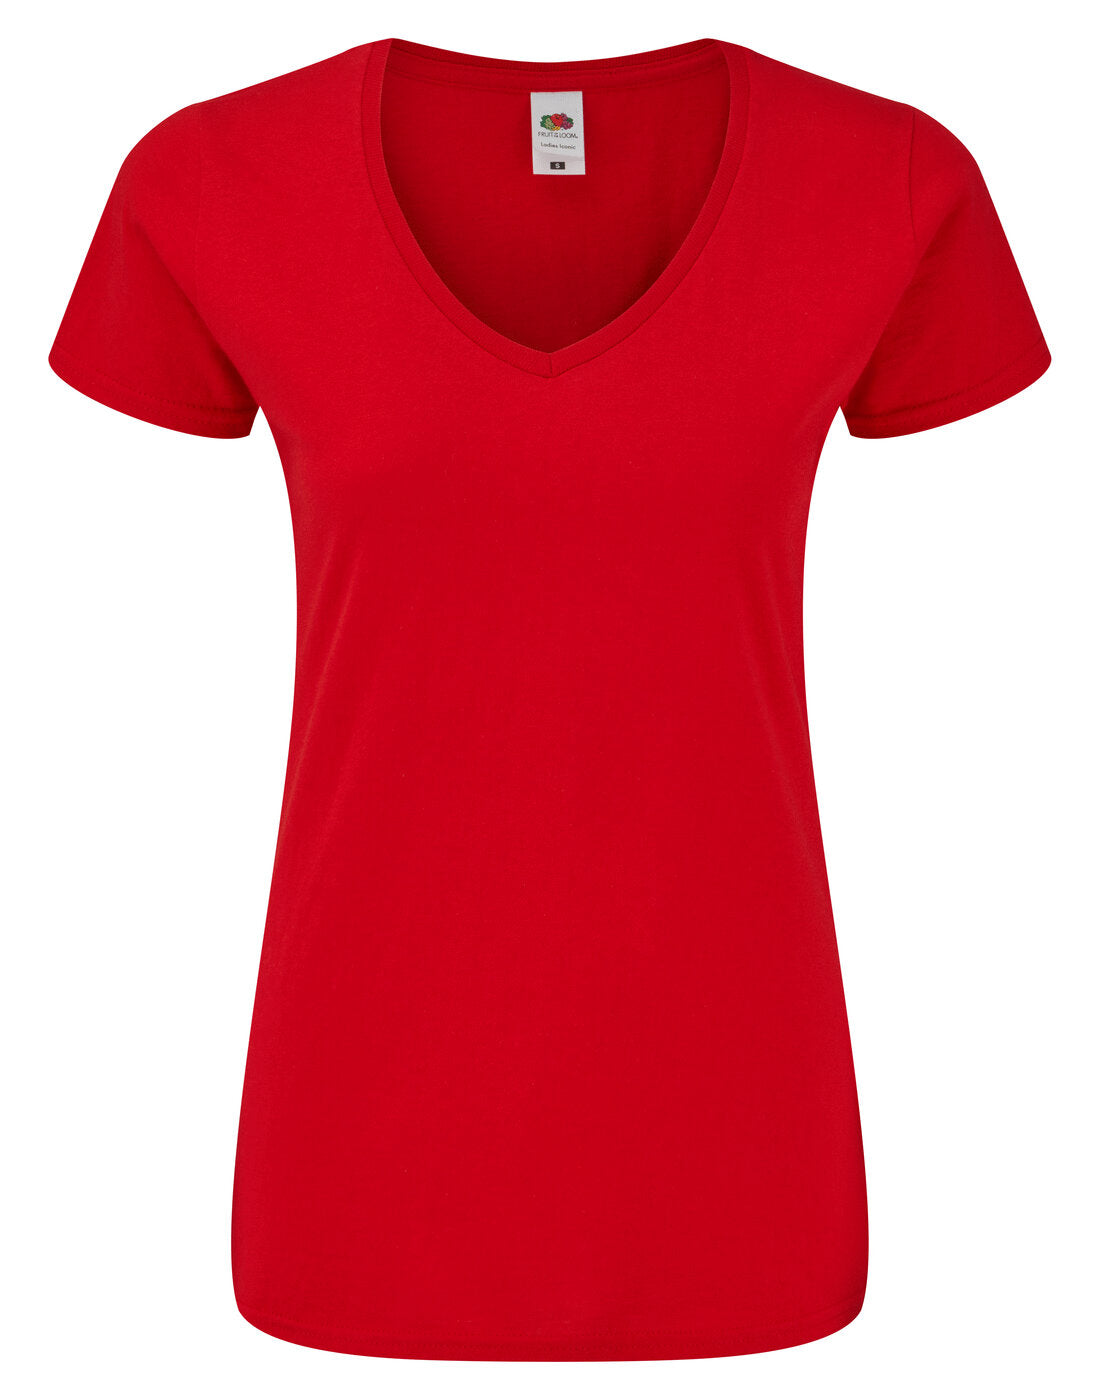 Fruit of the Loom Ladies Iconic 150 V Neck T - Red